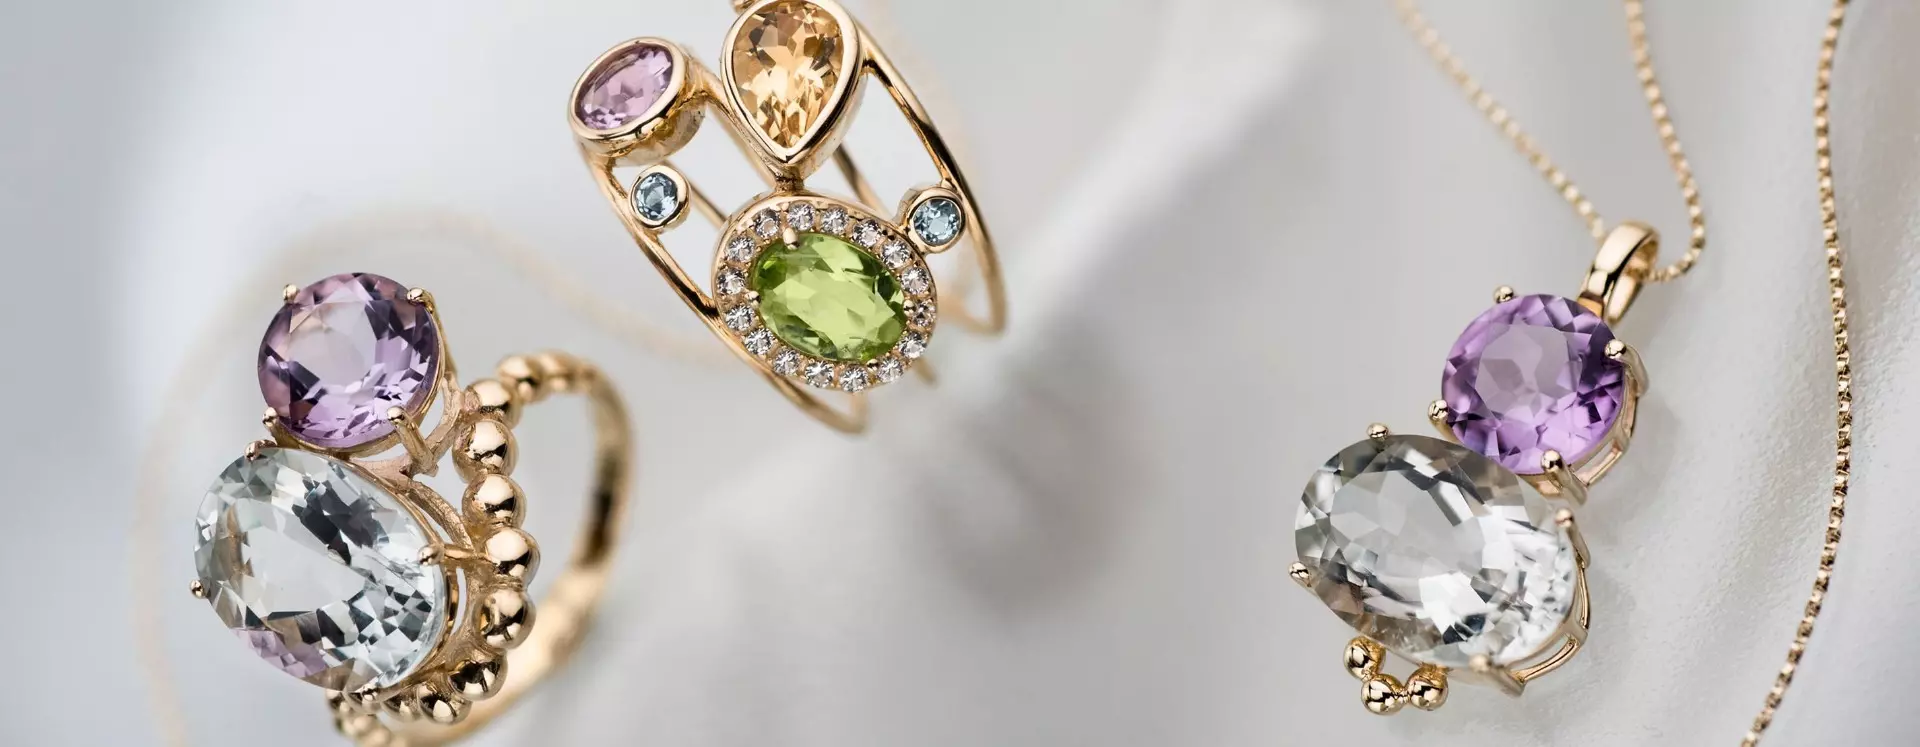 Rainbow Collection | 14K Gold Jewelry with Blue Topaz, Citrine, Amethyst and Peridot